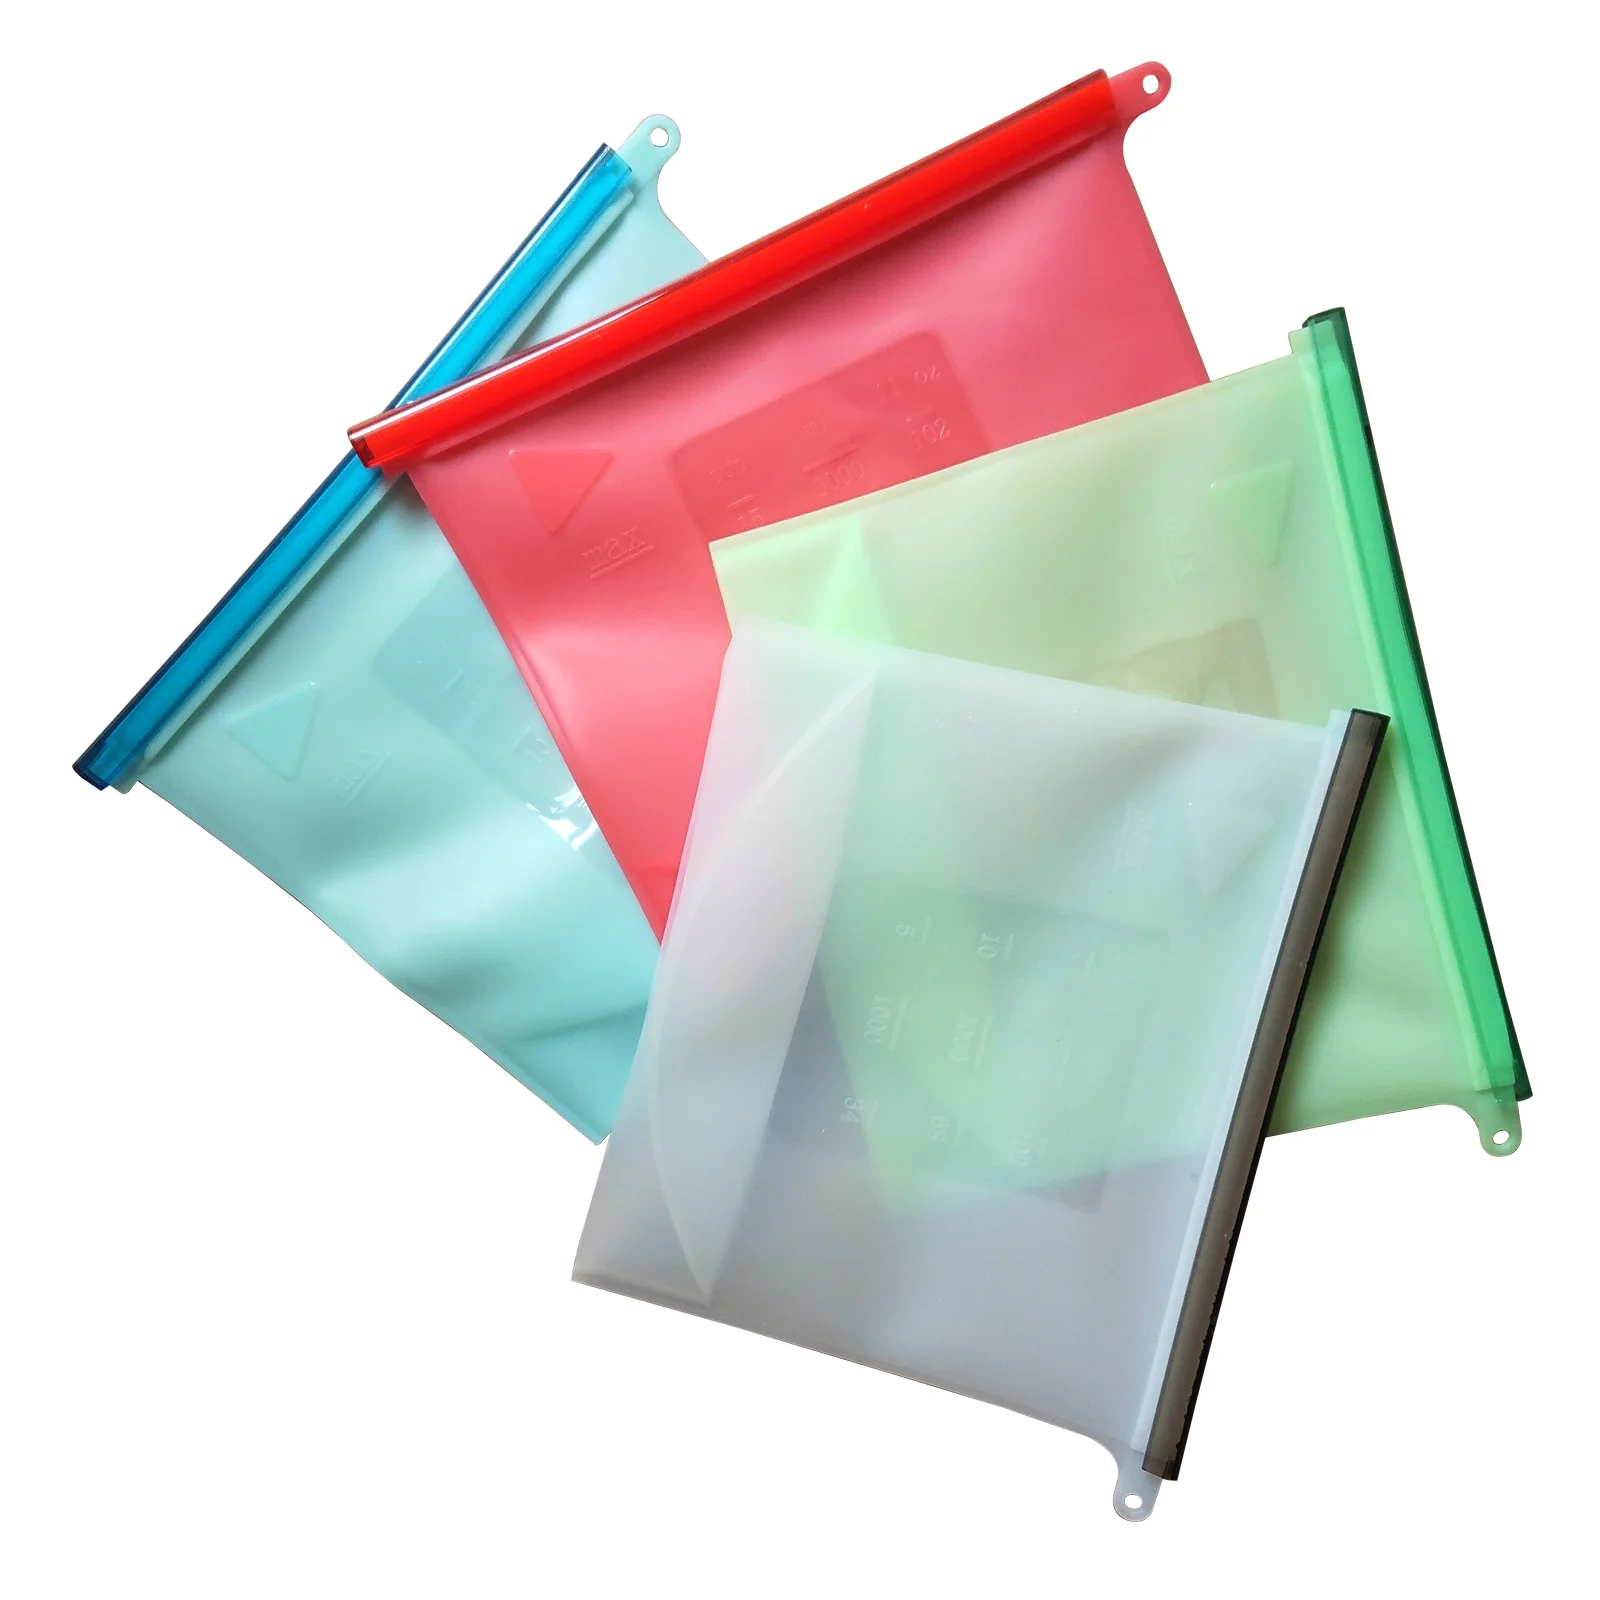 

Stand Up Reusable Snack Bags Silicone Food Bags Sandwich Lunch Bags FDA Food Grade for Kids Snack Fruit Vegetable Meat bags, Customized color